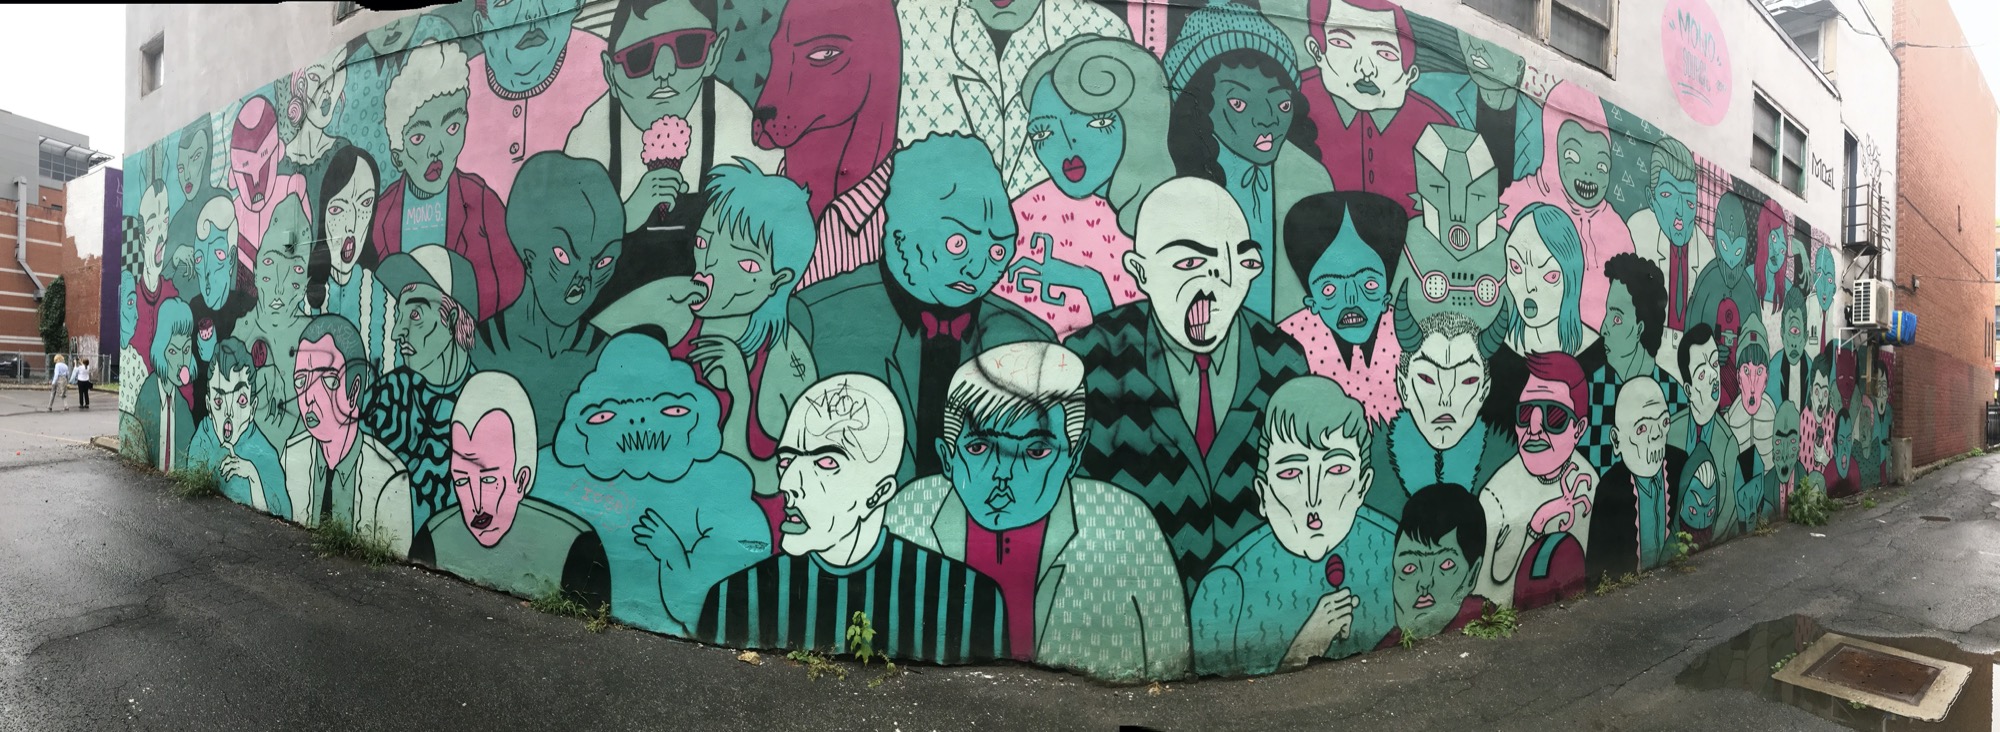 Graffiti 2919  by the artist Monosourcil captured by Rabot in Montréal Canada